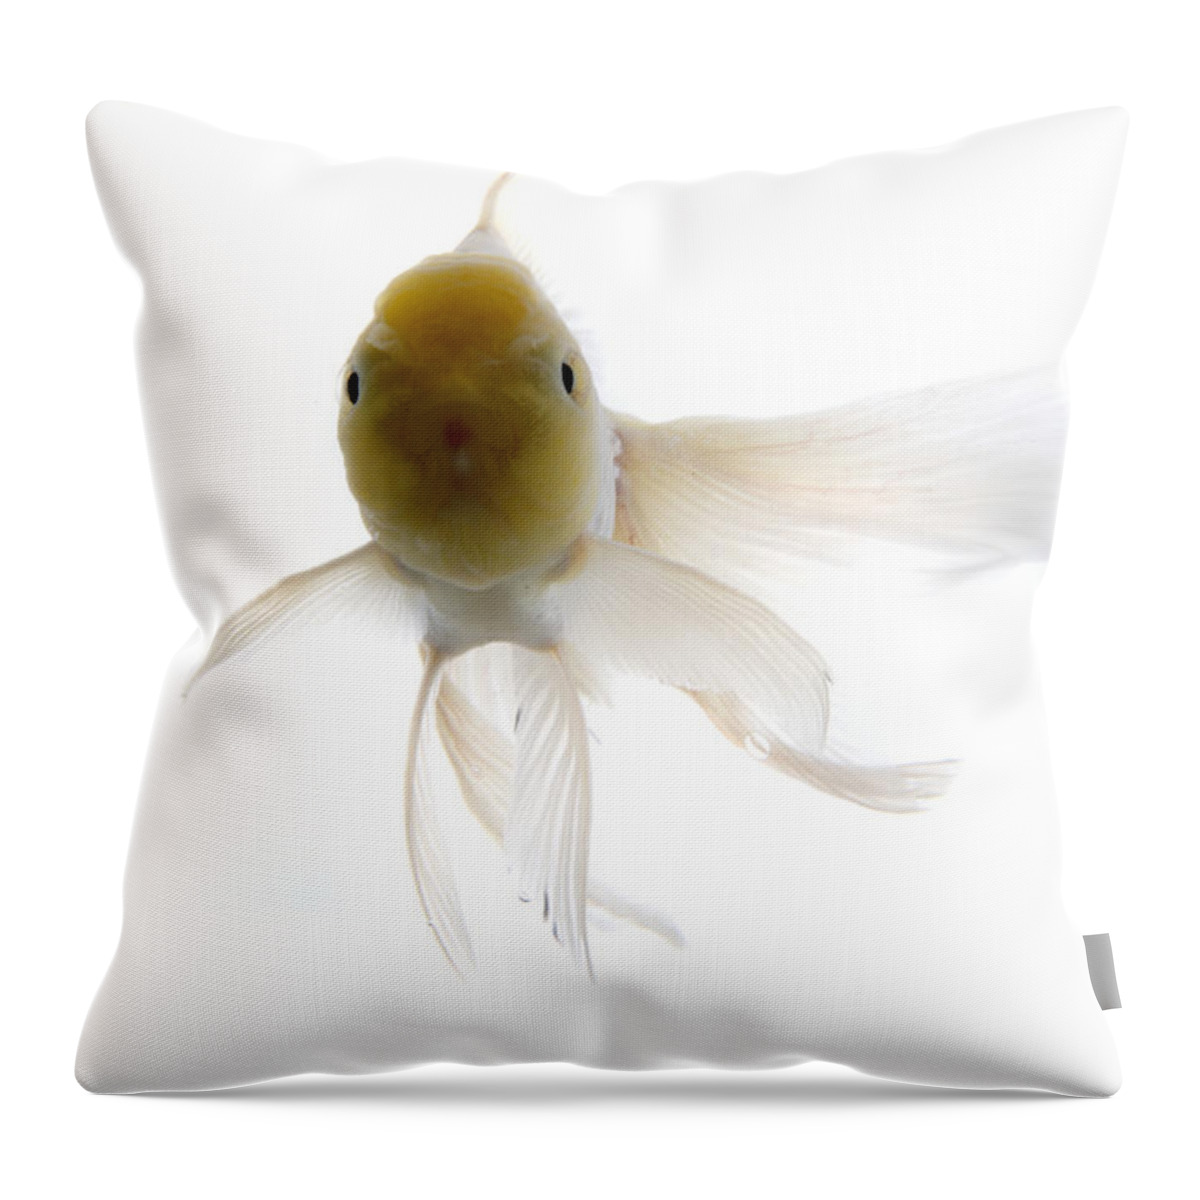 White Background Throw Pillow featuring the photograph Goldfish Against White Background by Jun Takahashi